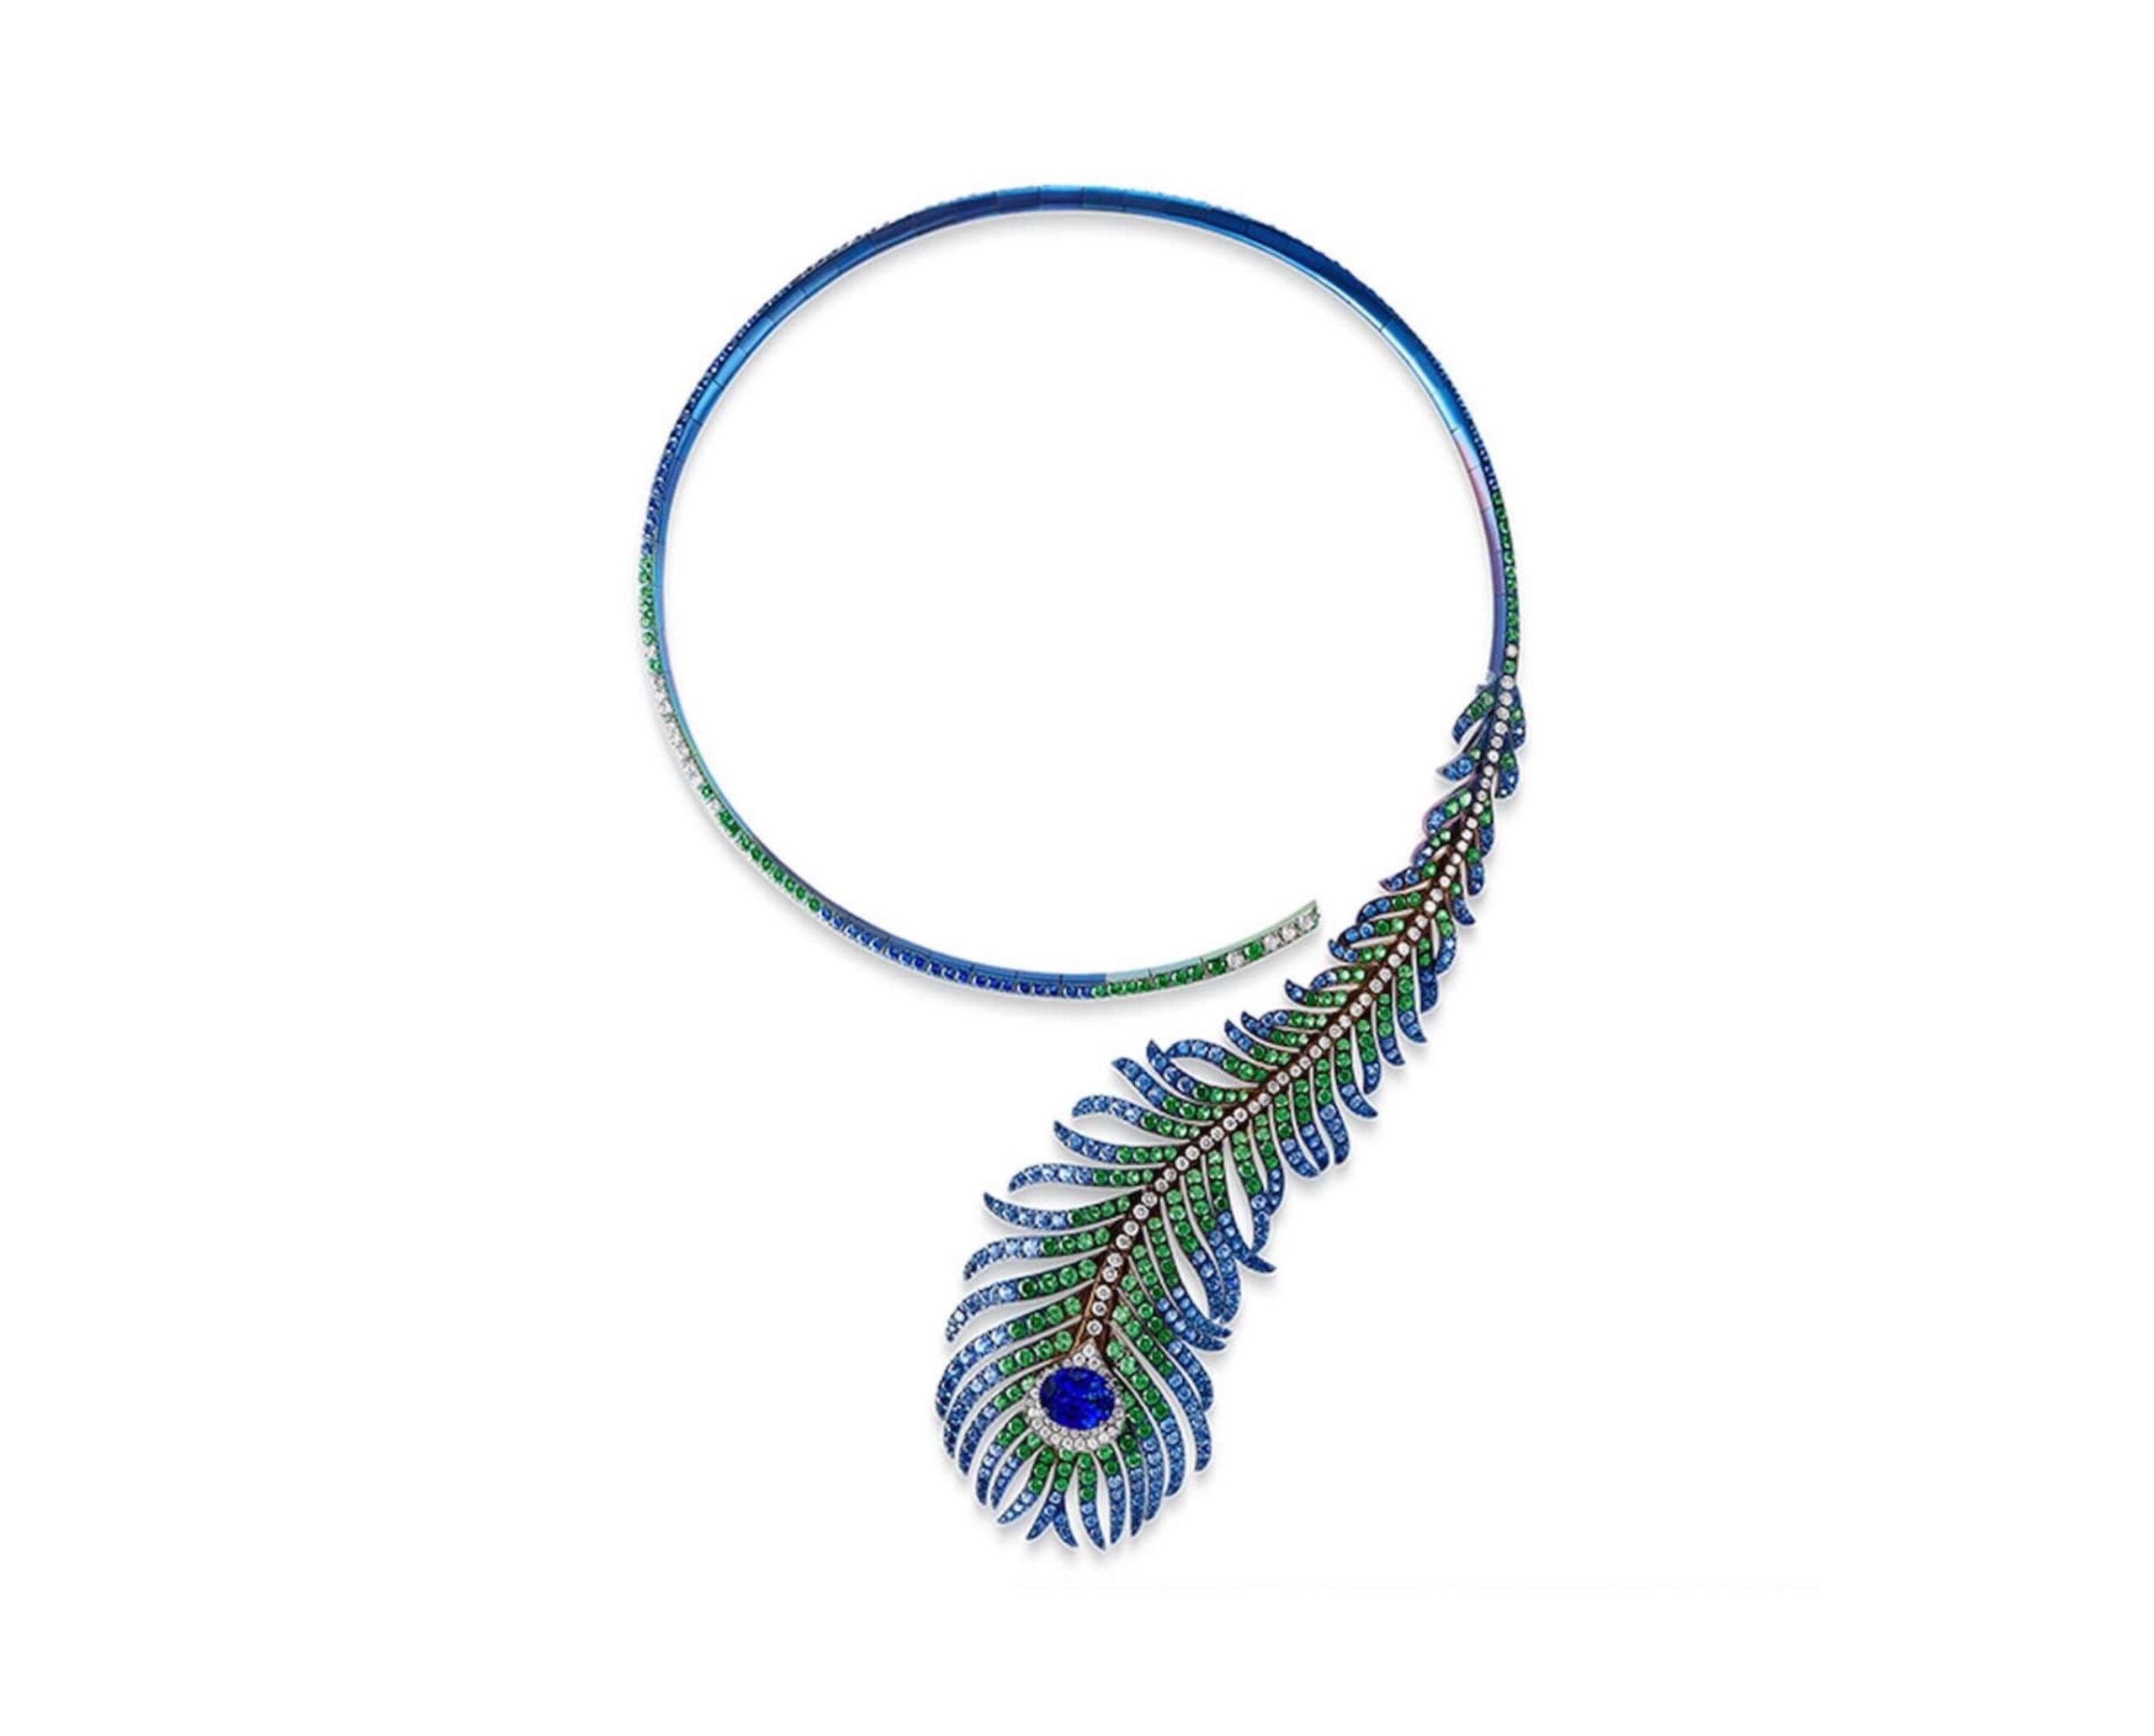 Spring into Style with these Nature-inspired Jewelry